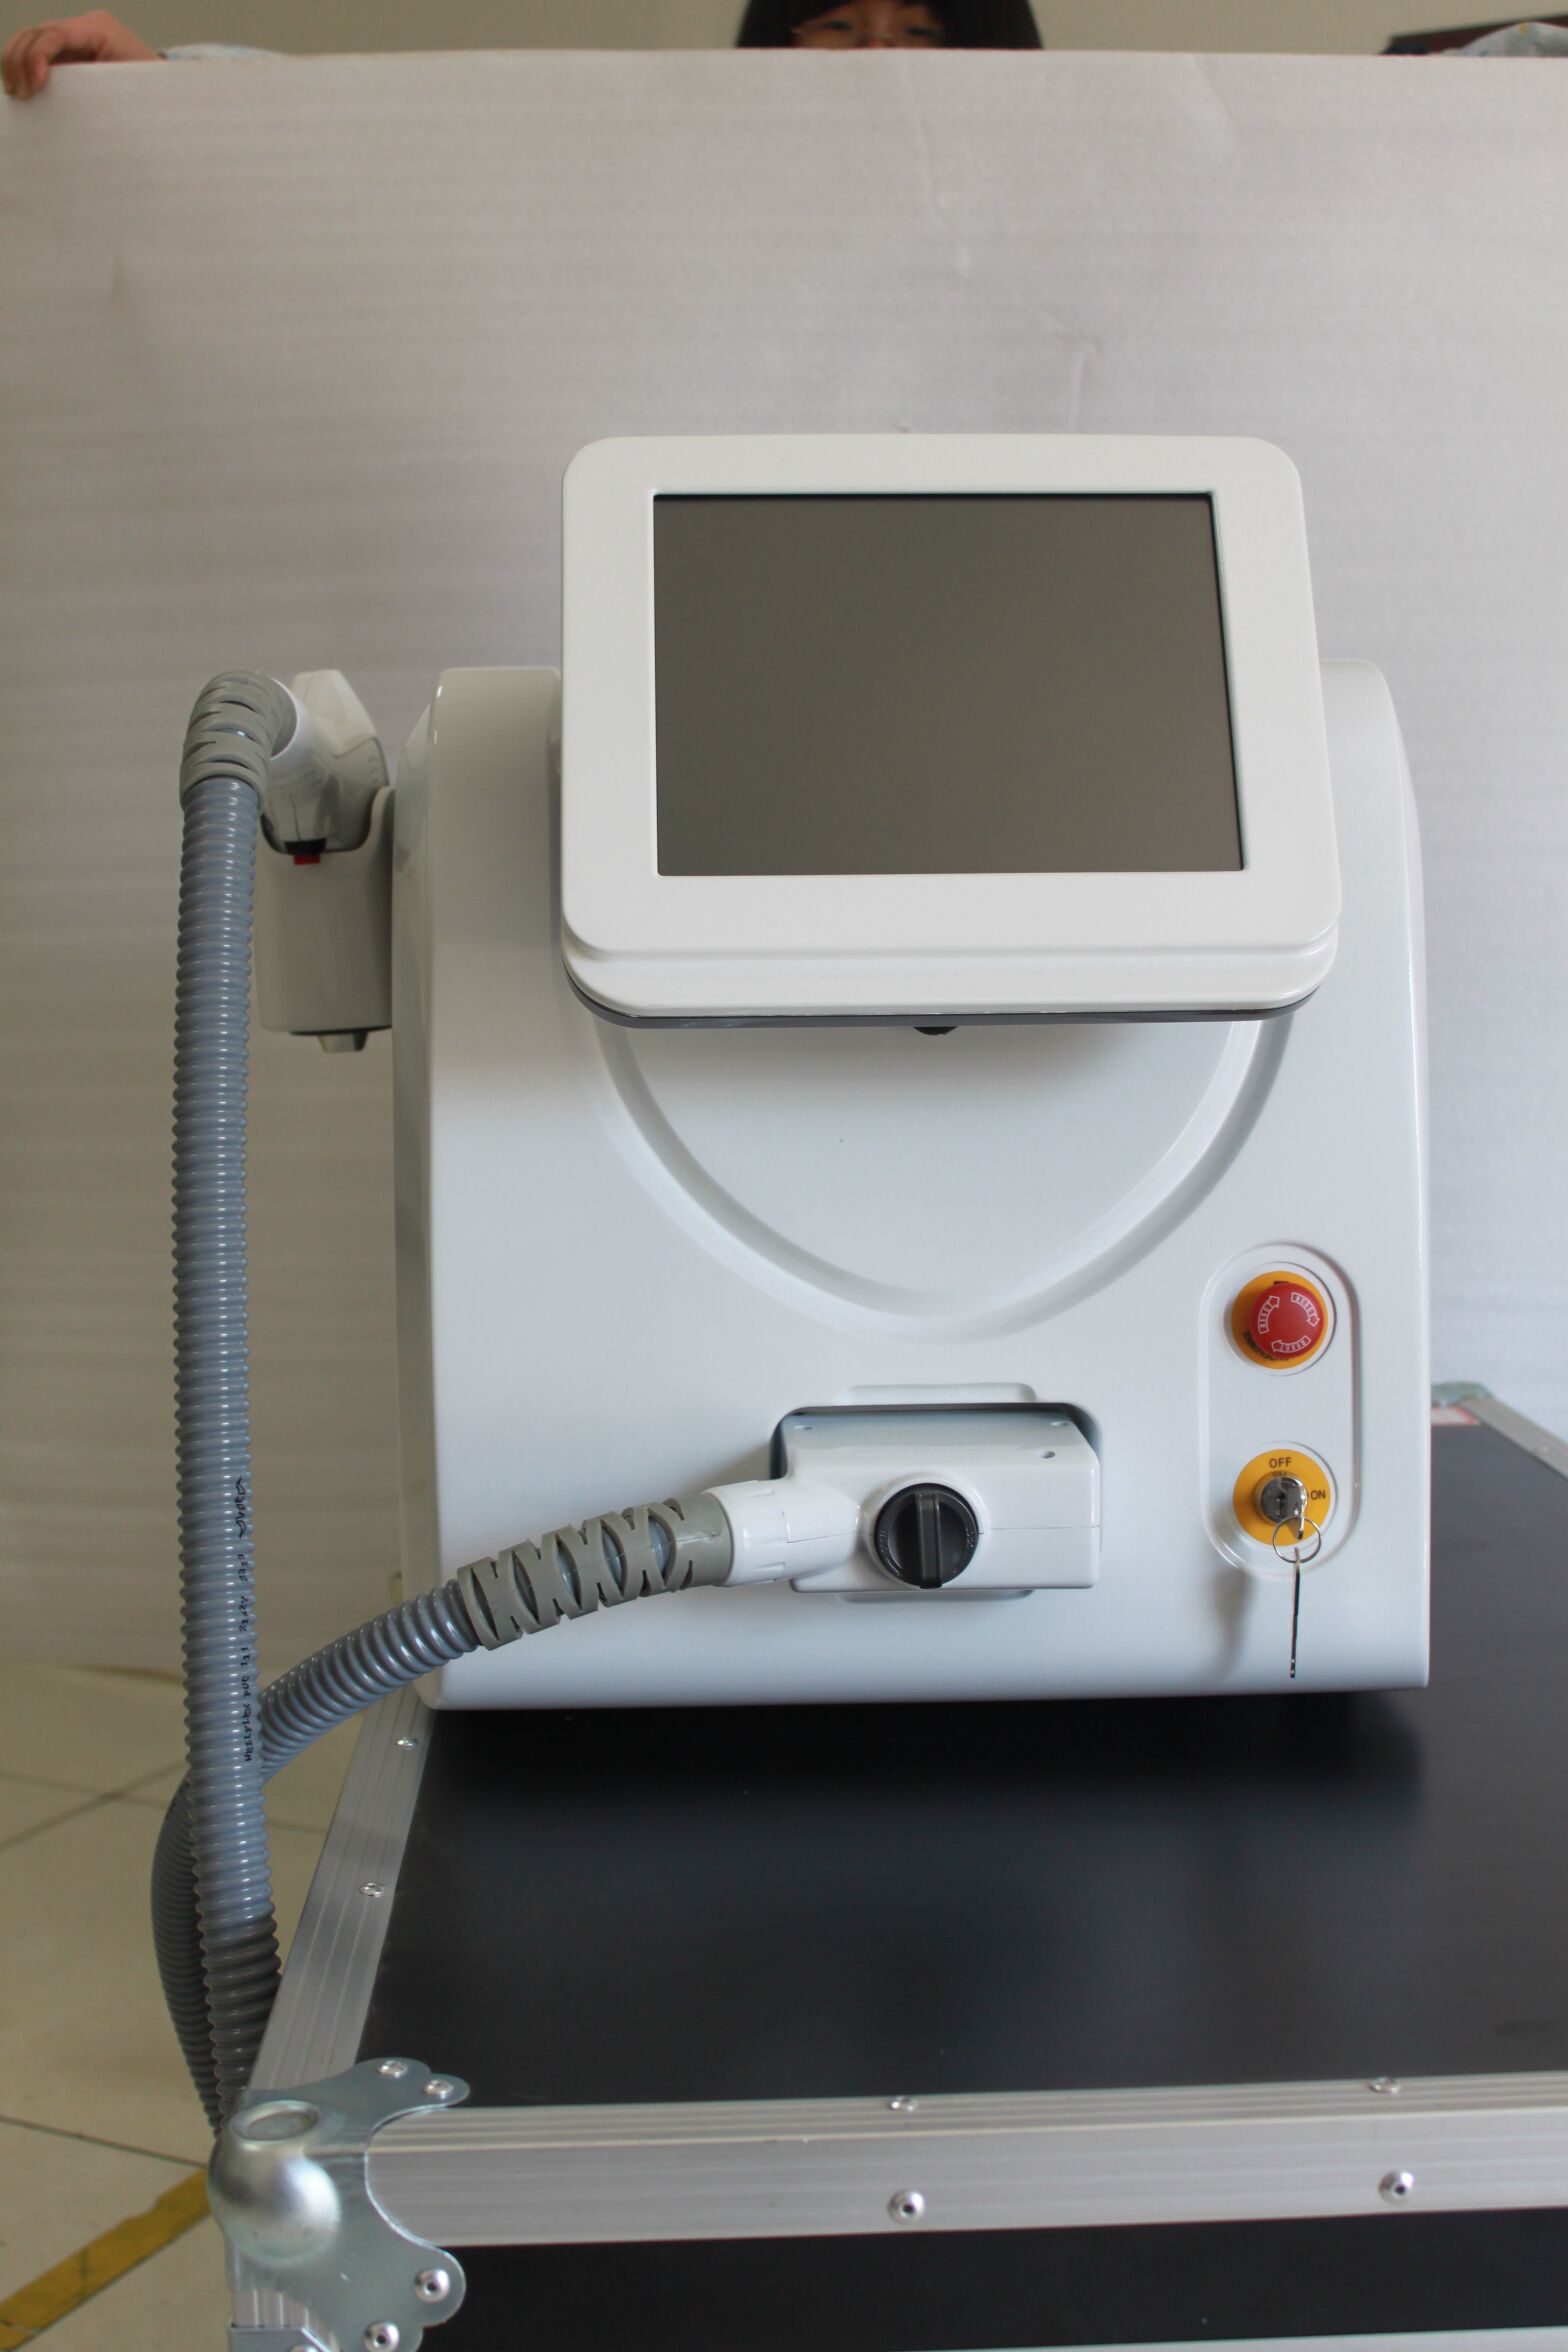 Cost of laser hair removal